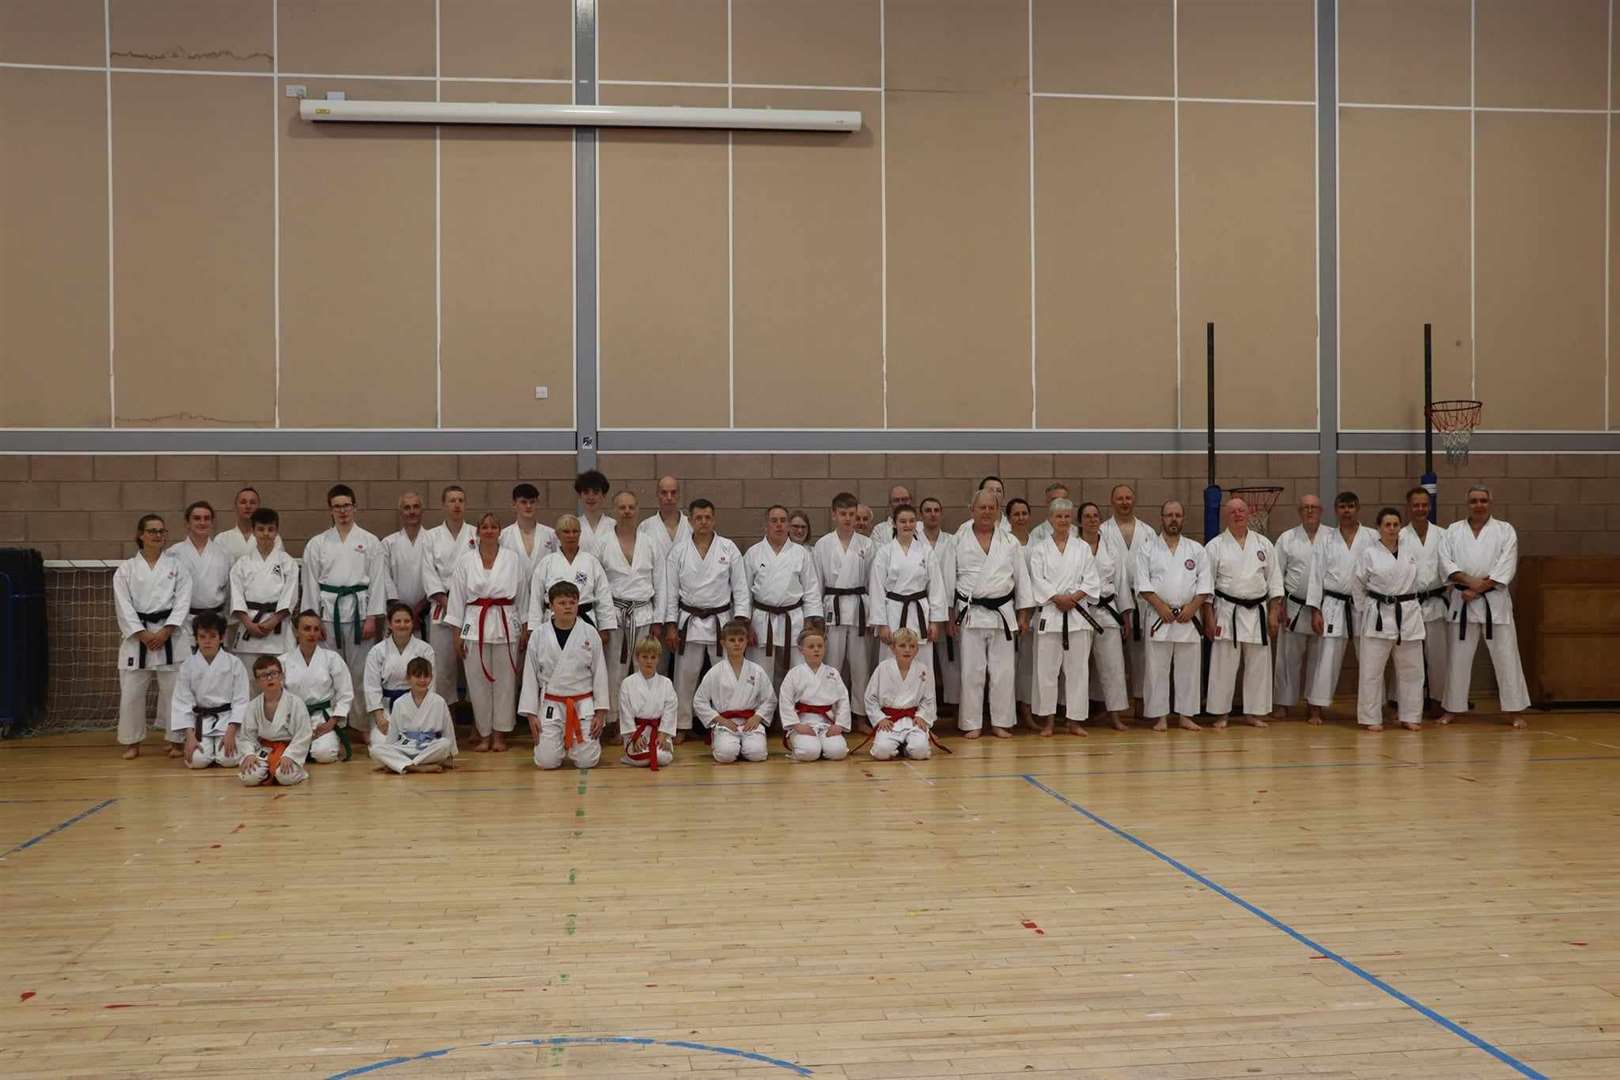 Students from across the UK and Europe attended the Karate Academy Scotland event.